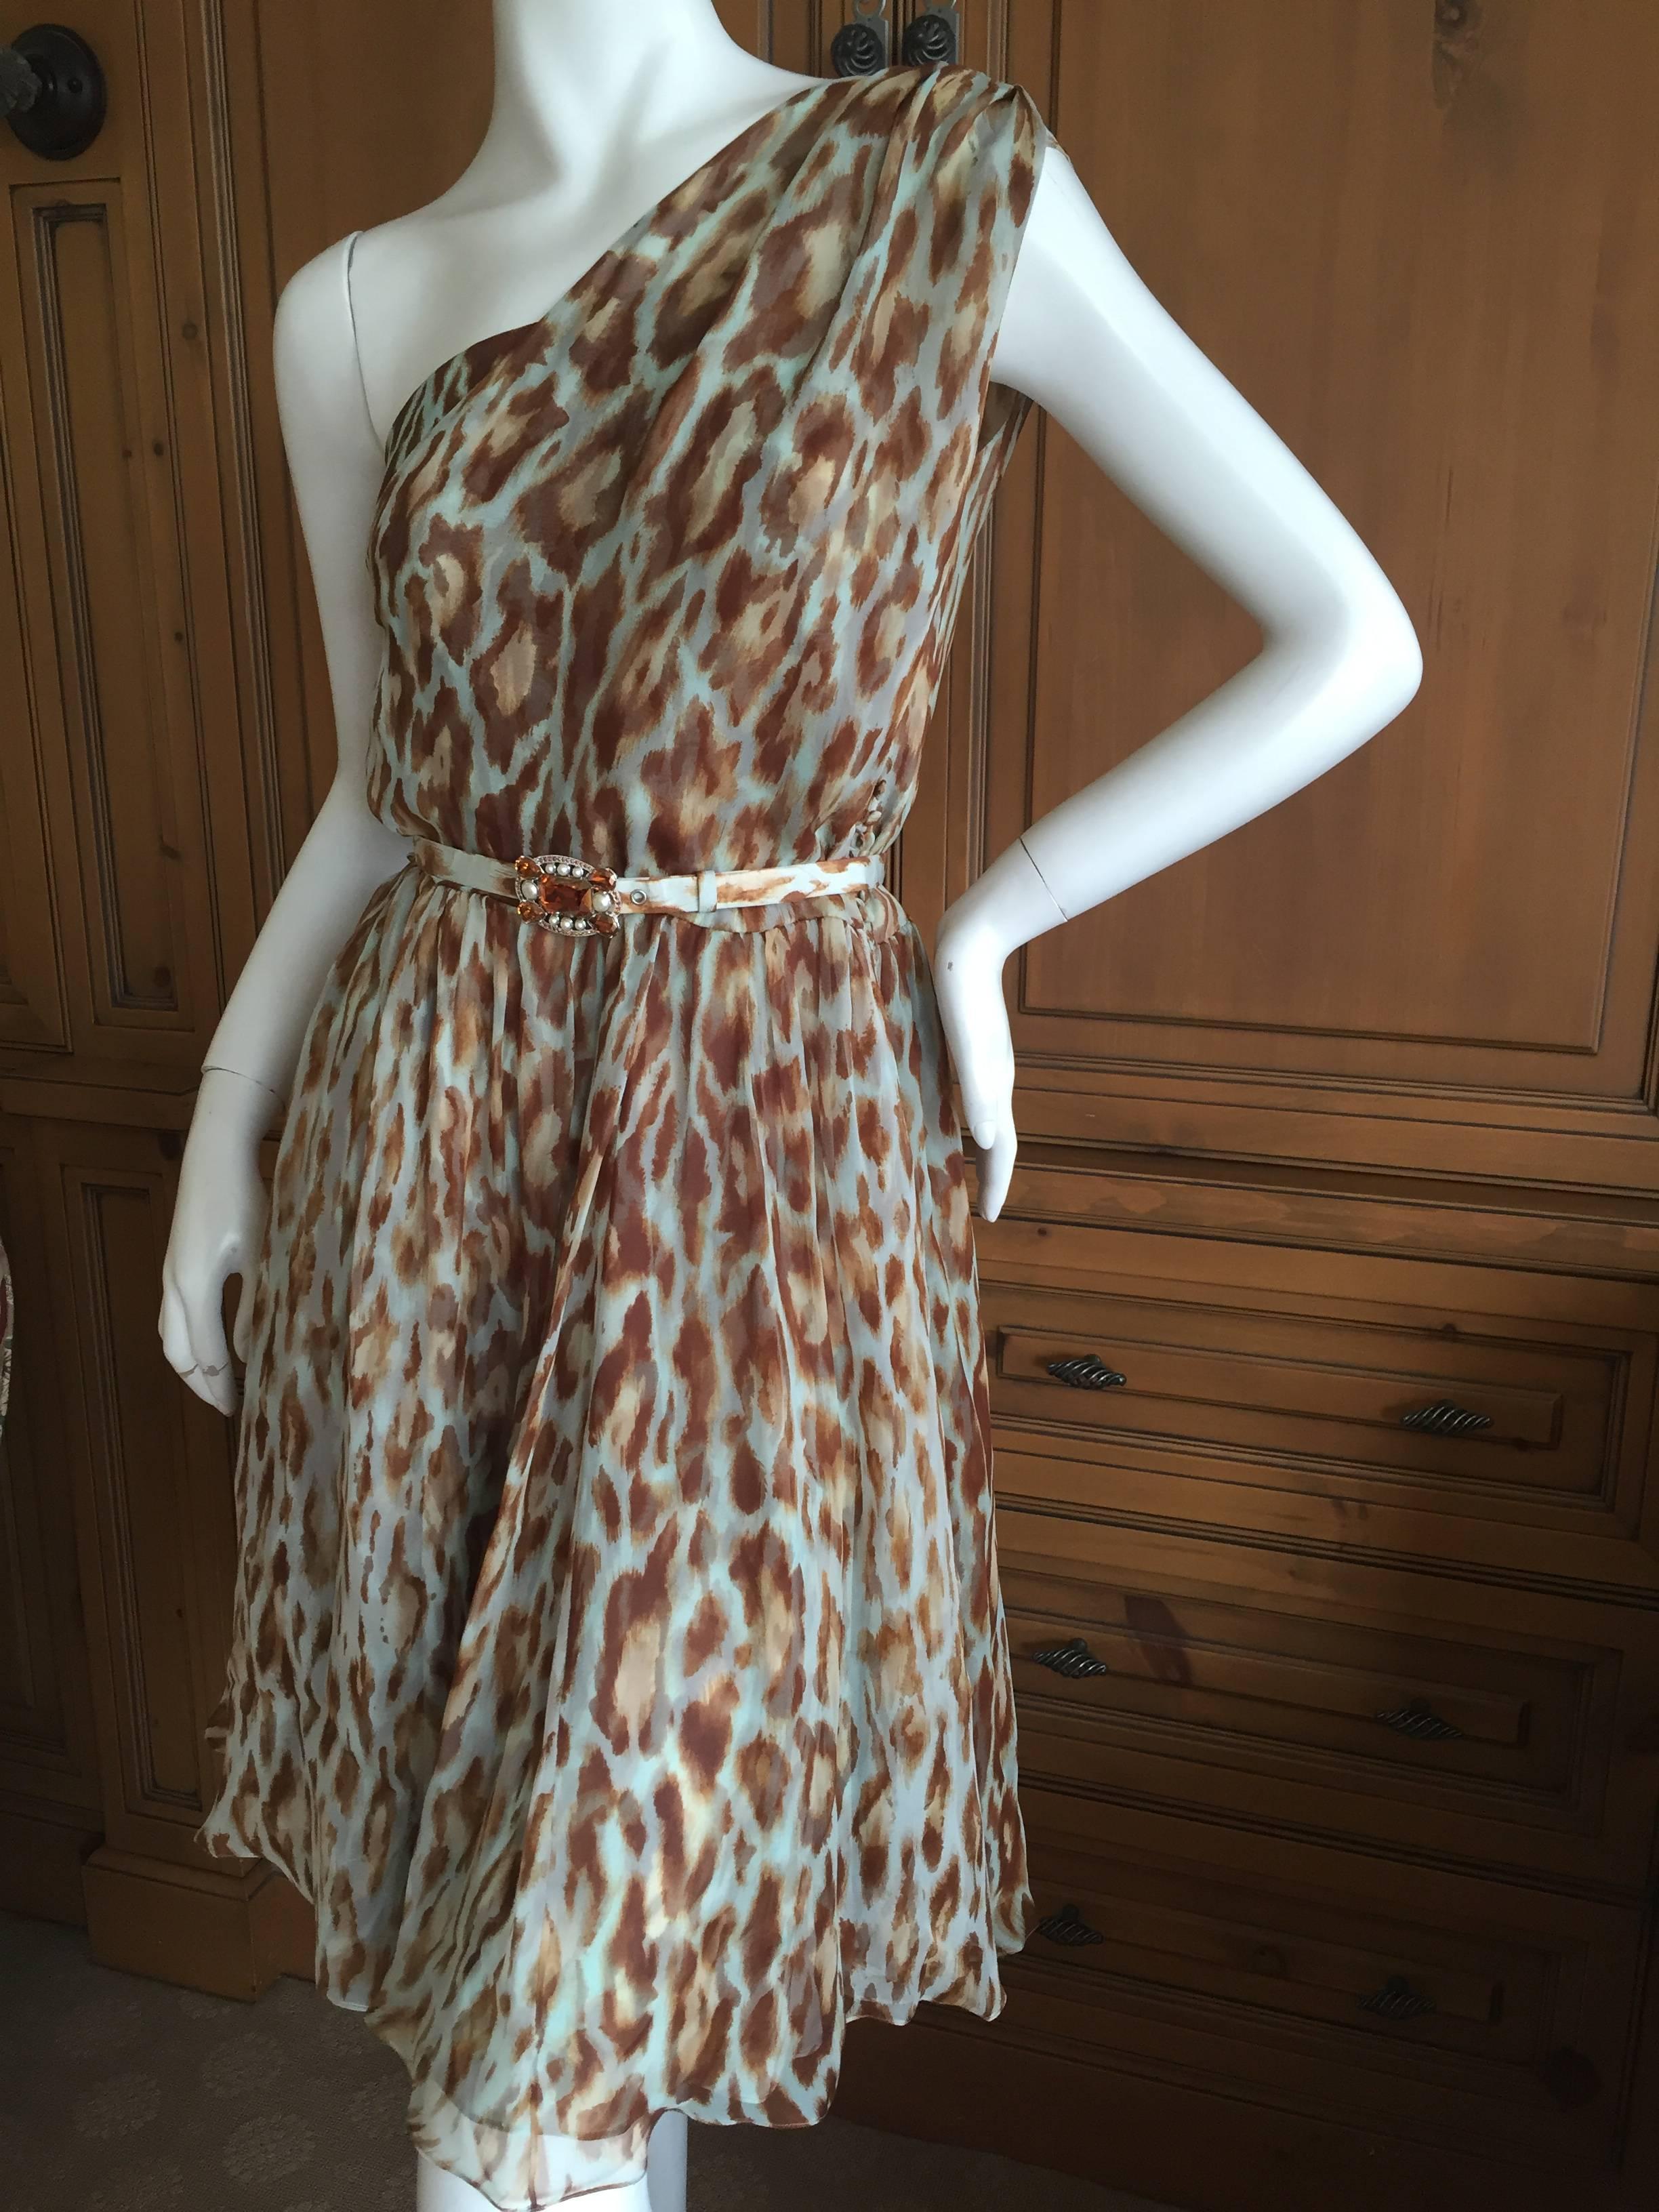 Beautiful leopard print silk one shoulder dress by Galliano for Christian Dior.
With jeweled belt.
Size 36
Bust 36